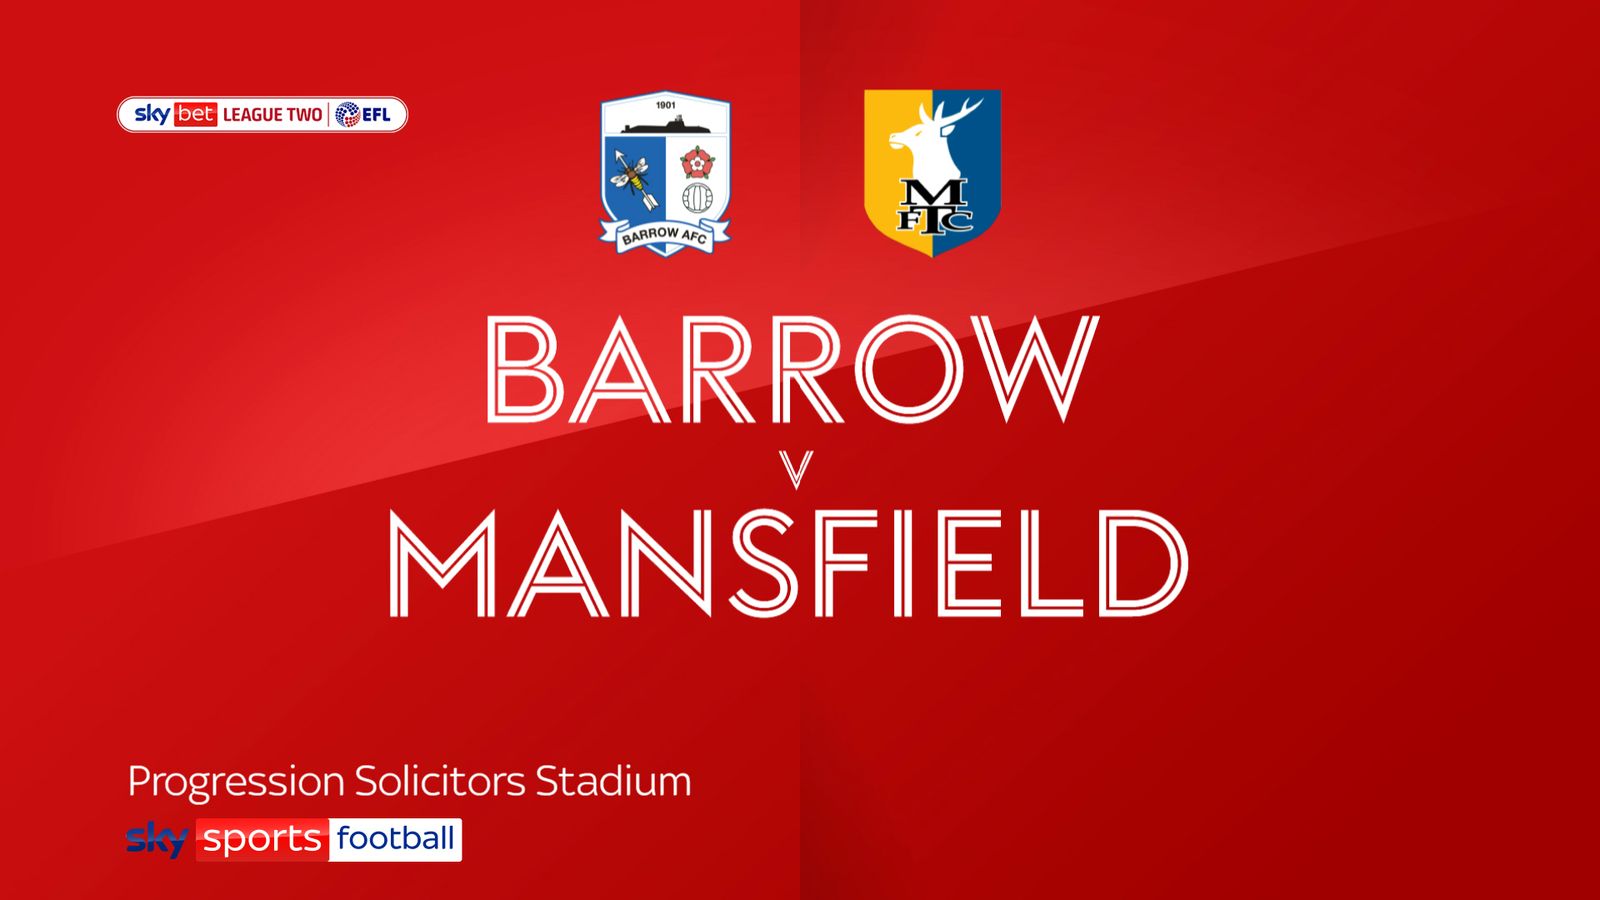 Barrow 2-0 Mansfield: Patrick Brough double fires Bluebirds to victory ...